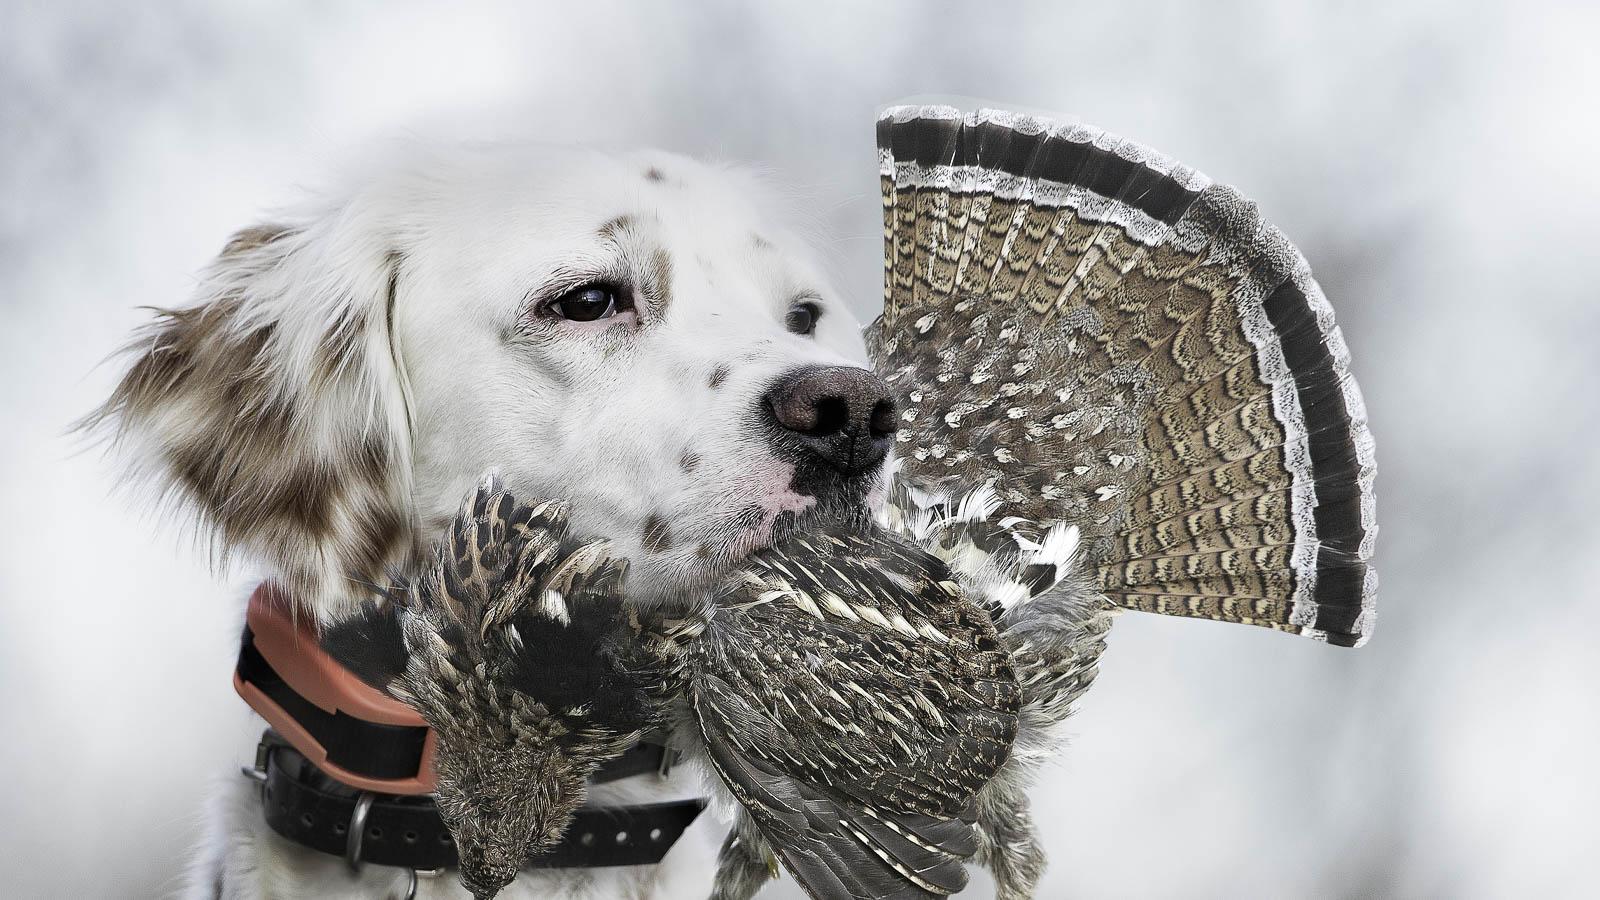 Dog holding a ruffled grouse in its mouth while wearing an UplandHunter collar